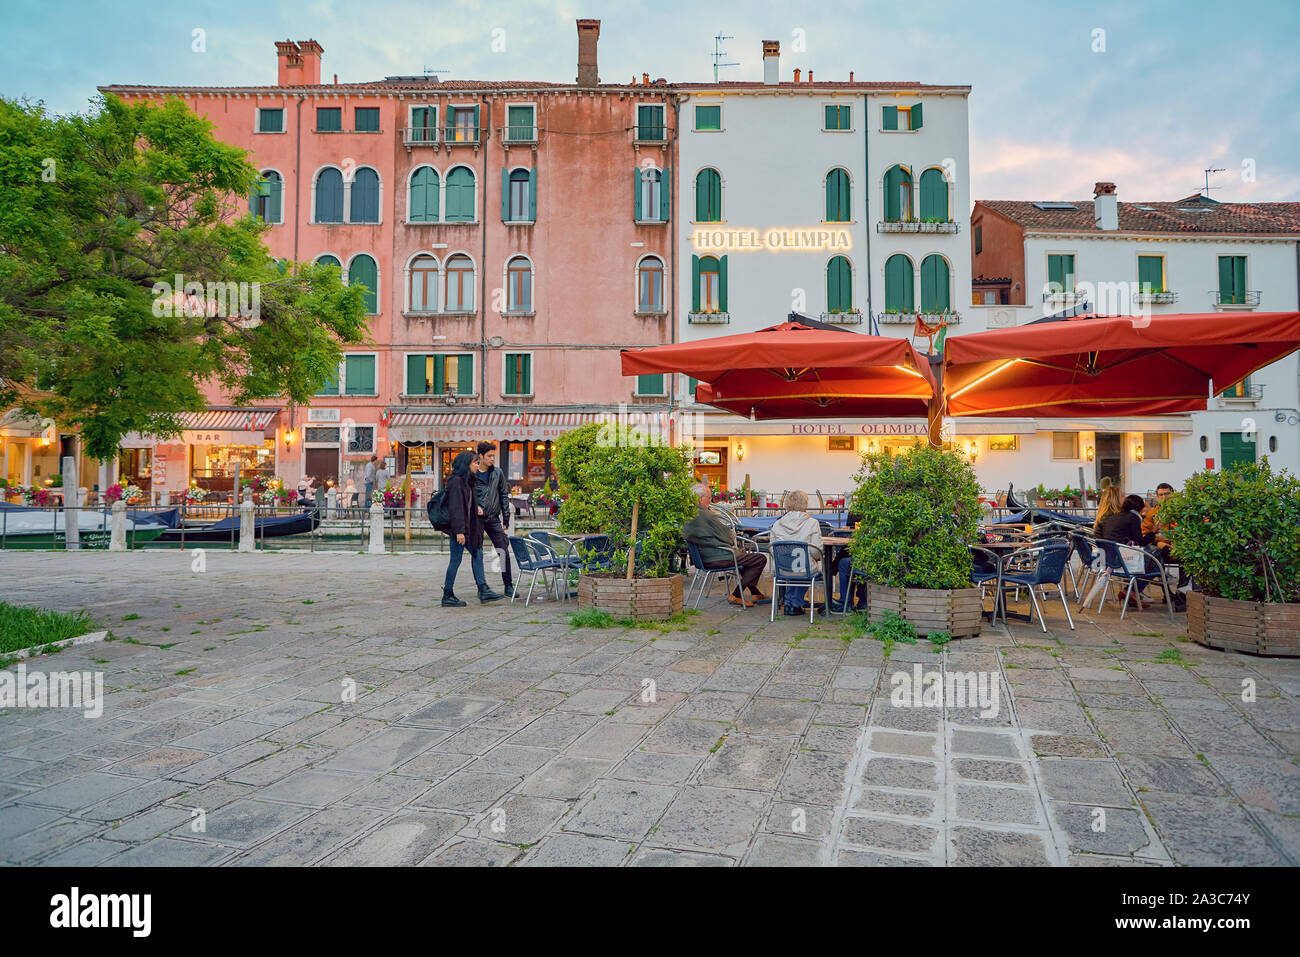 VENICE, ITALY - CIRCA MAY, 2019: view of Hotel Olimpia building located in Venice. Stock Photo